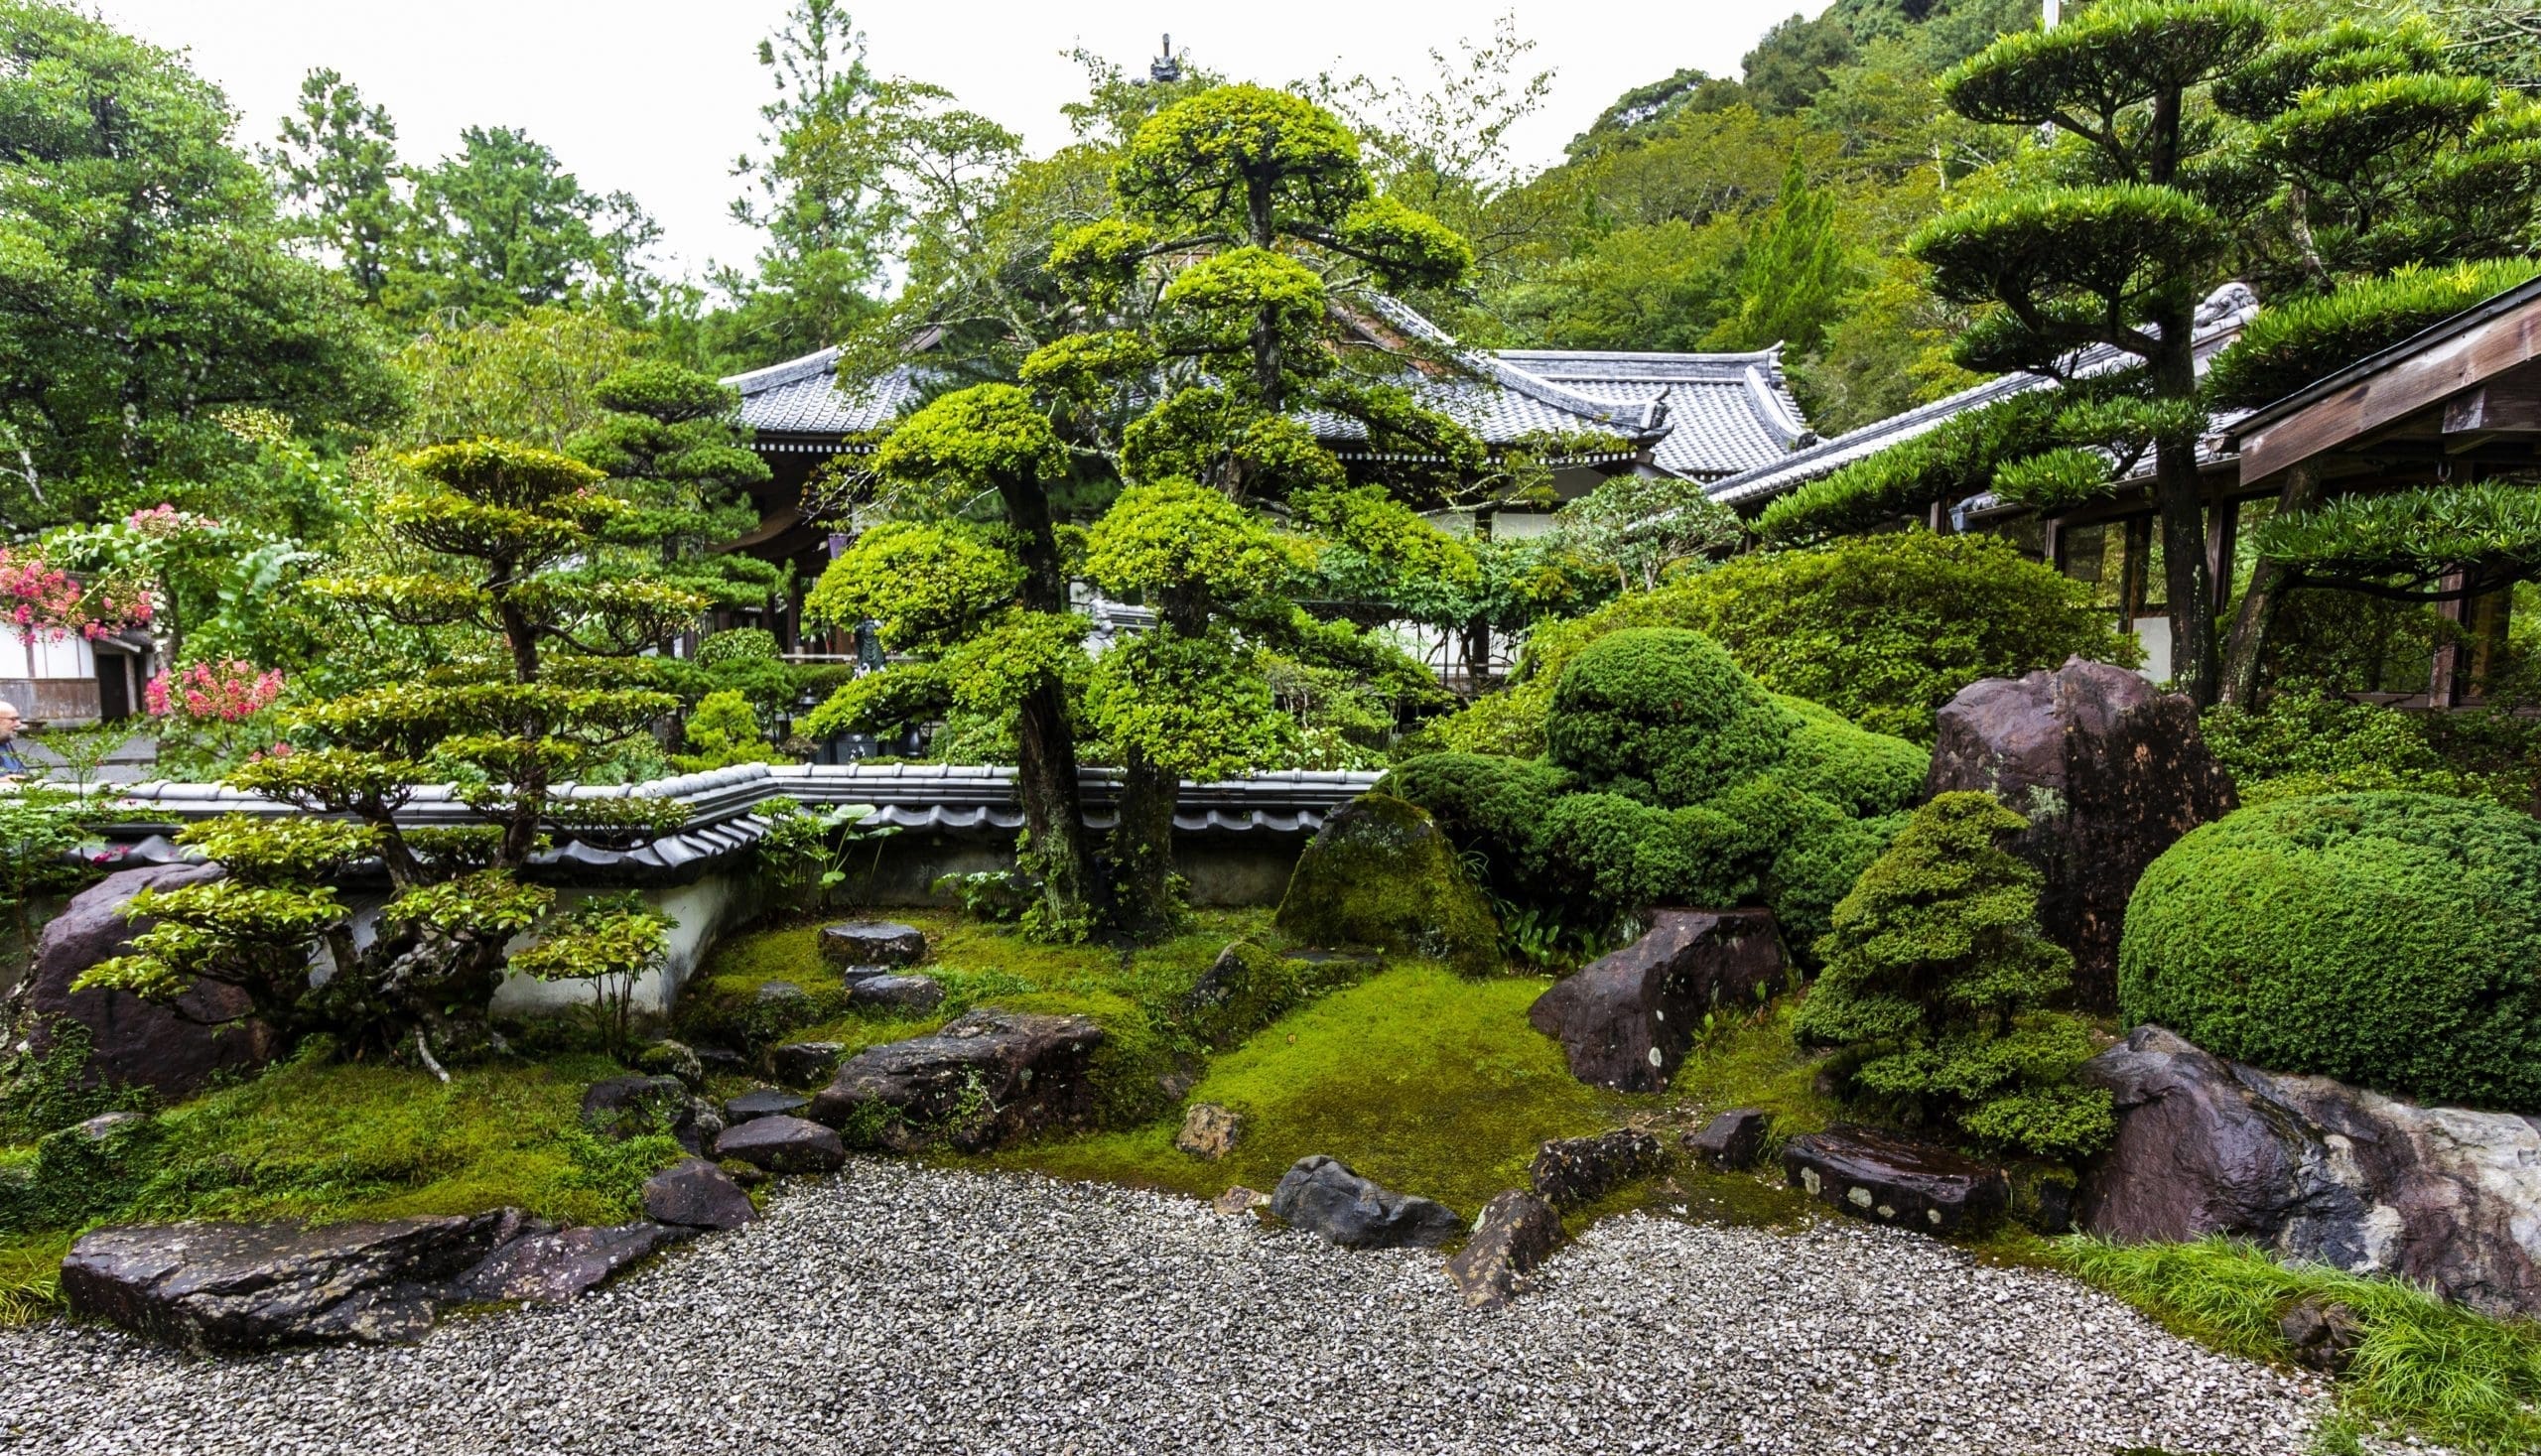 A large Japanese garden filled with bonsai trees